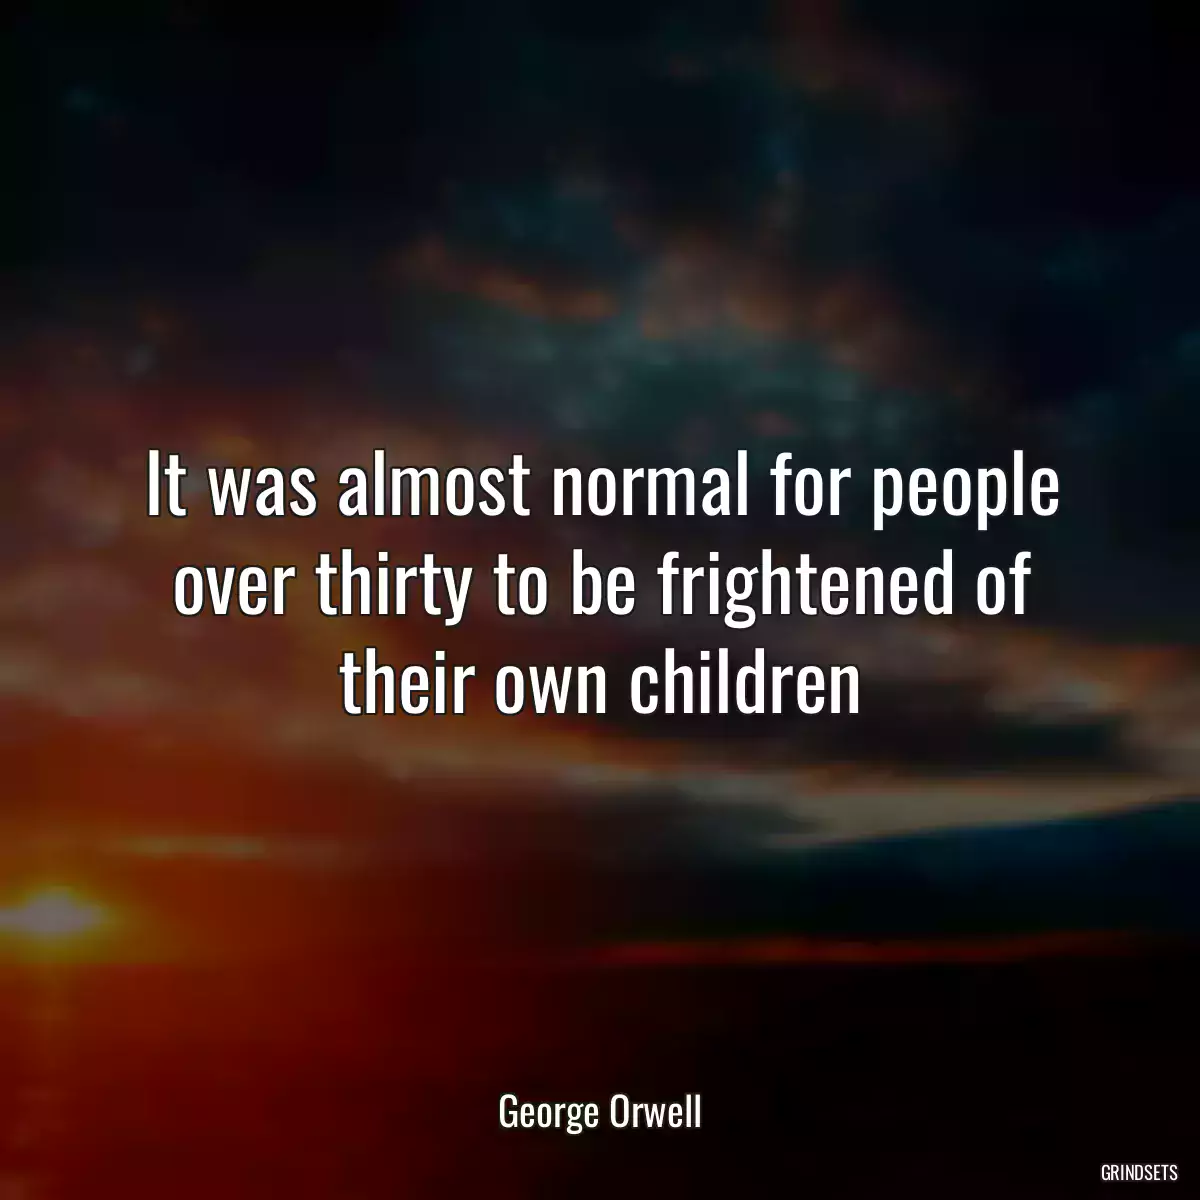 It was almost normal for people over thirty to be frightened of their own children